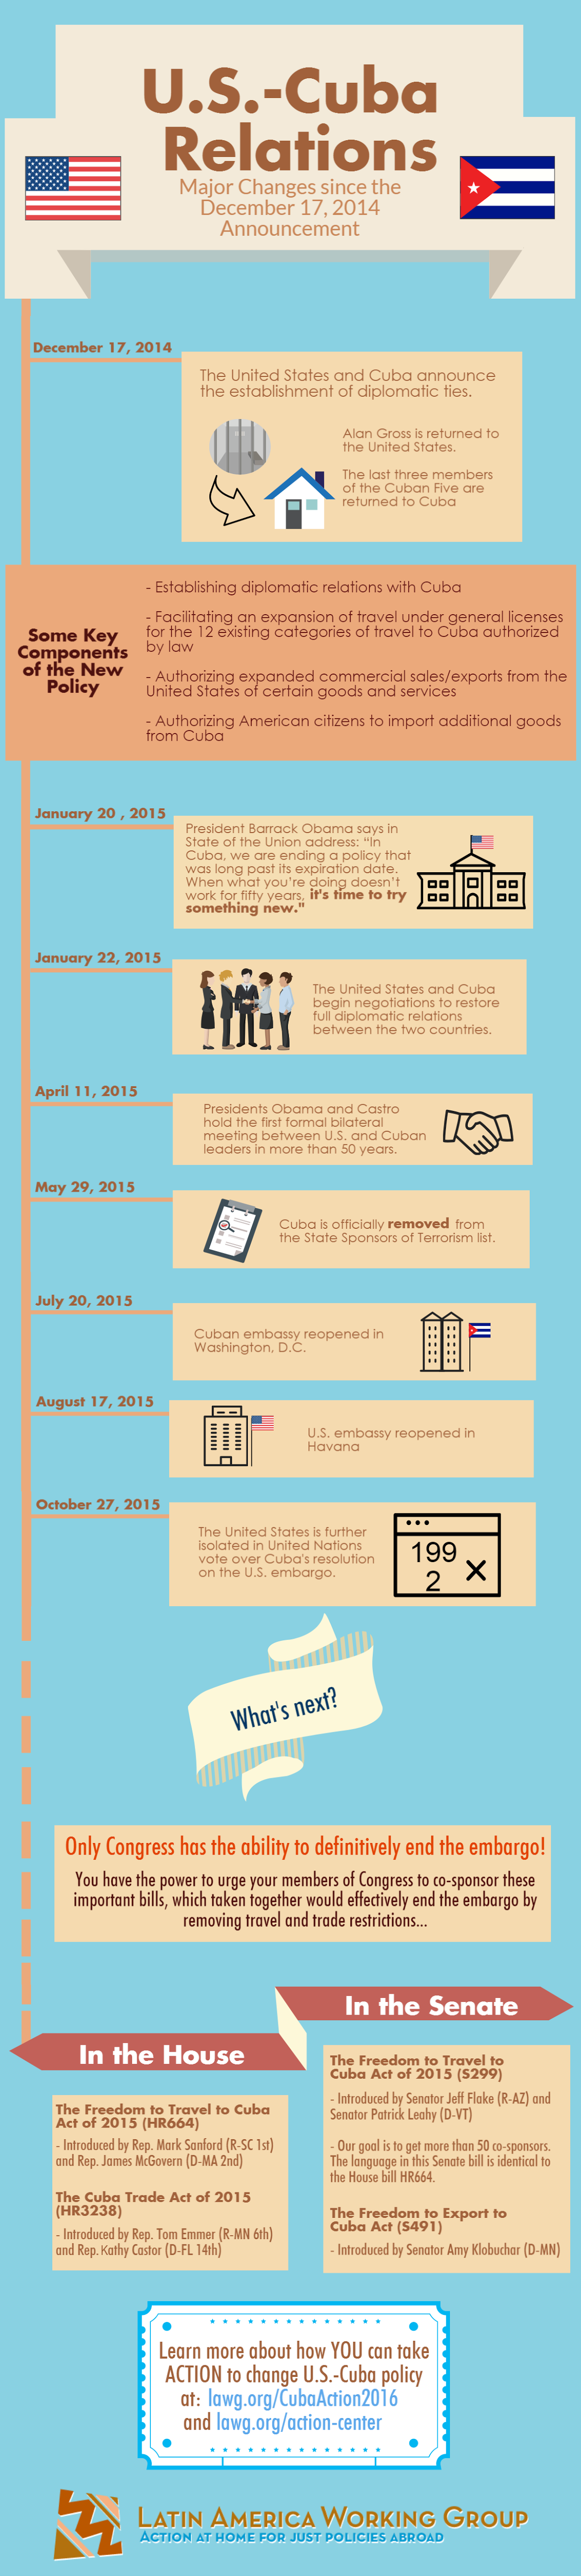 US-Cuba Relations timeline infographic